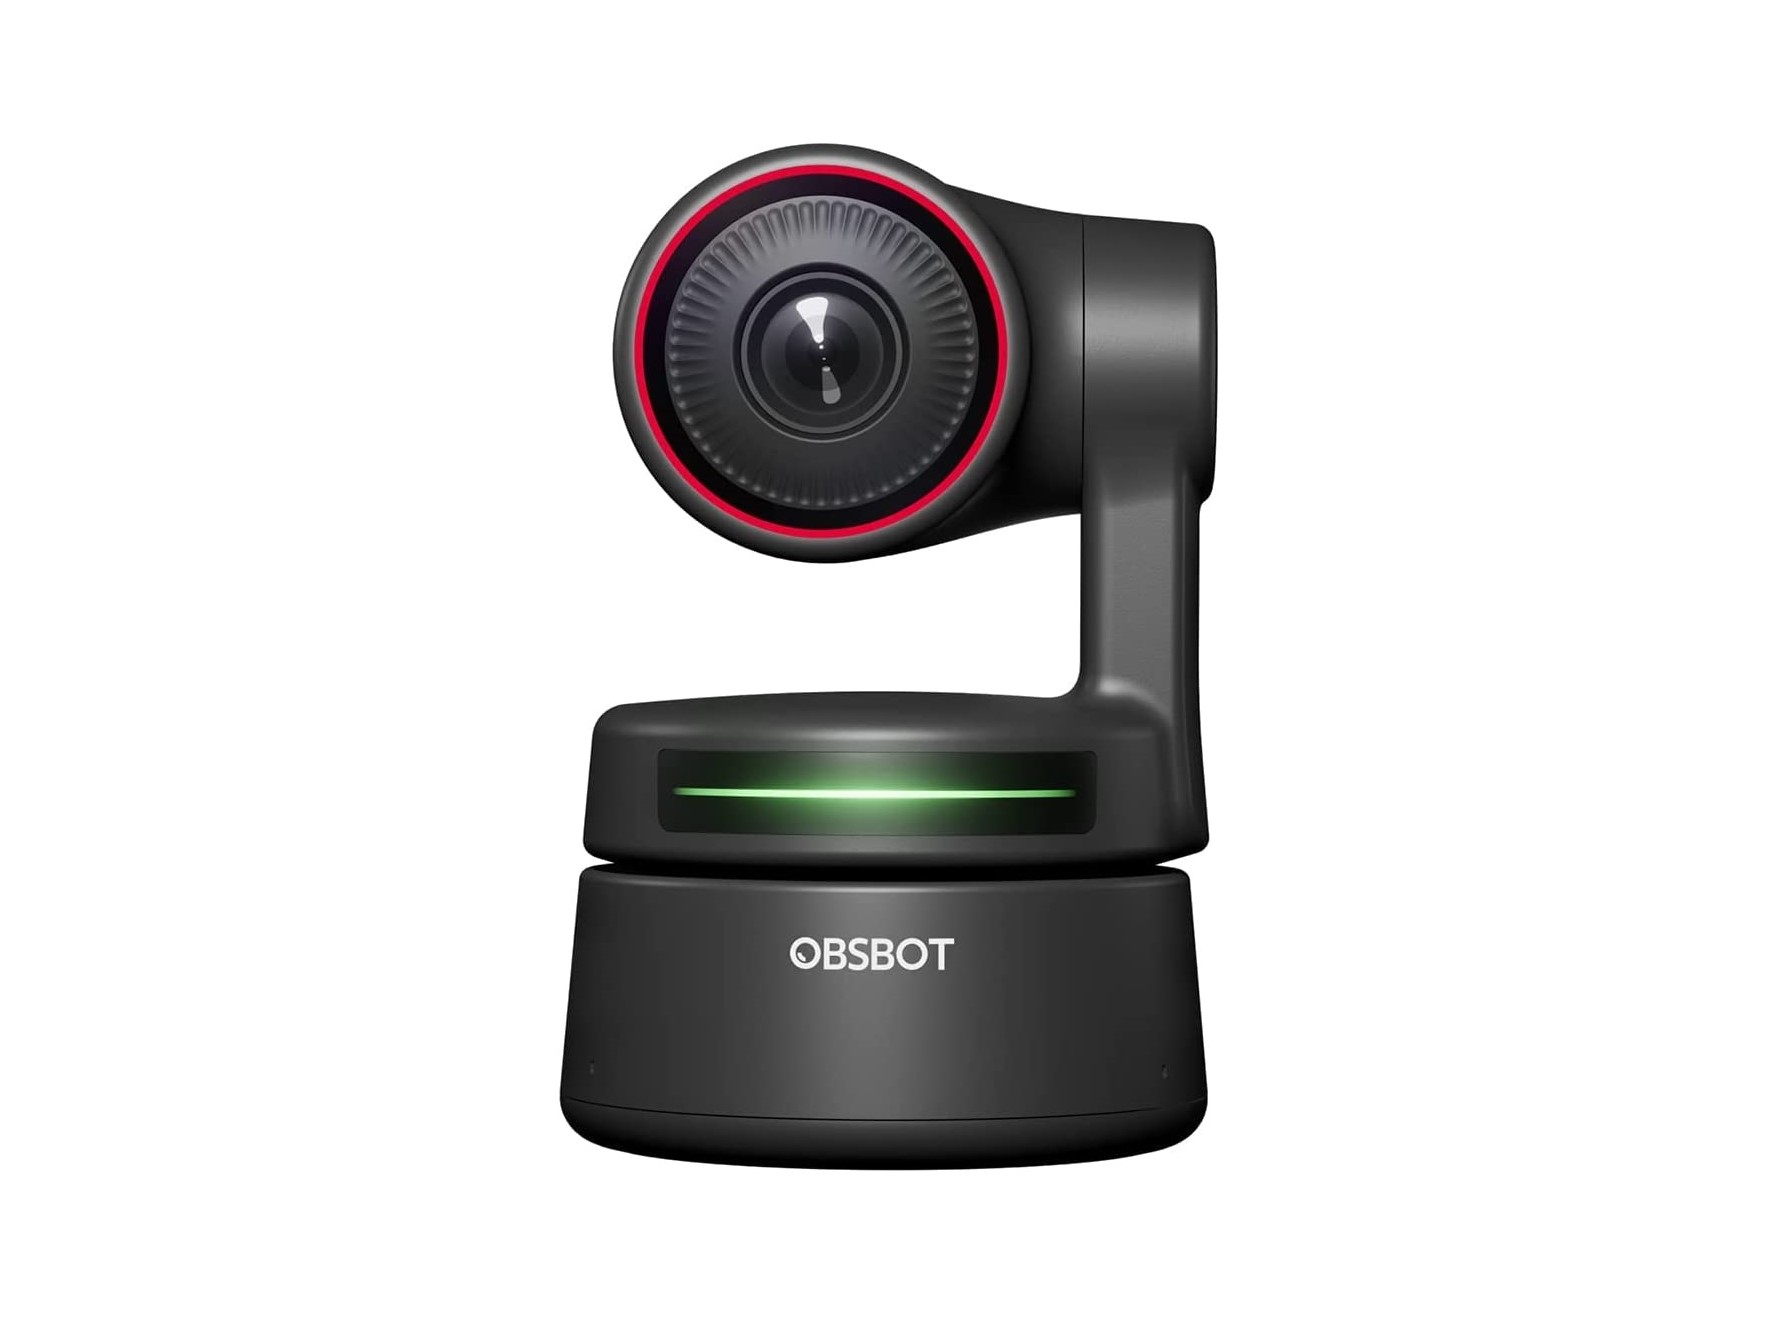 OBSBOT Tiny 4K is a petite UHD webcam with AI-powered tracking